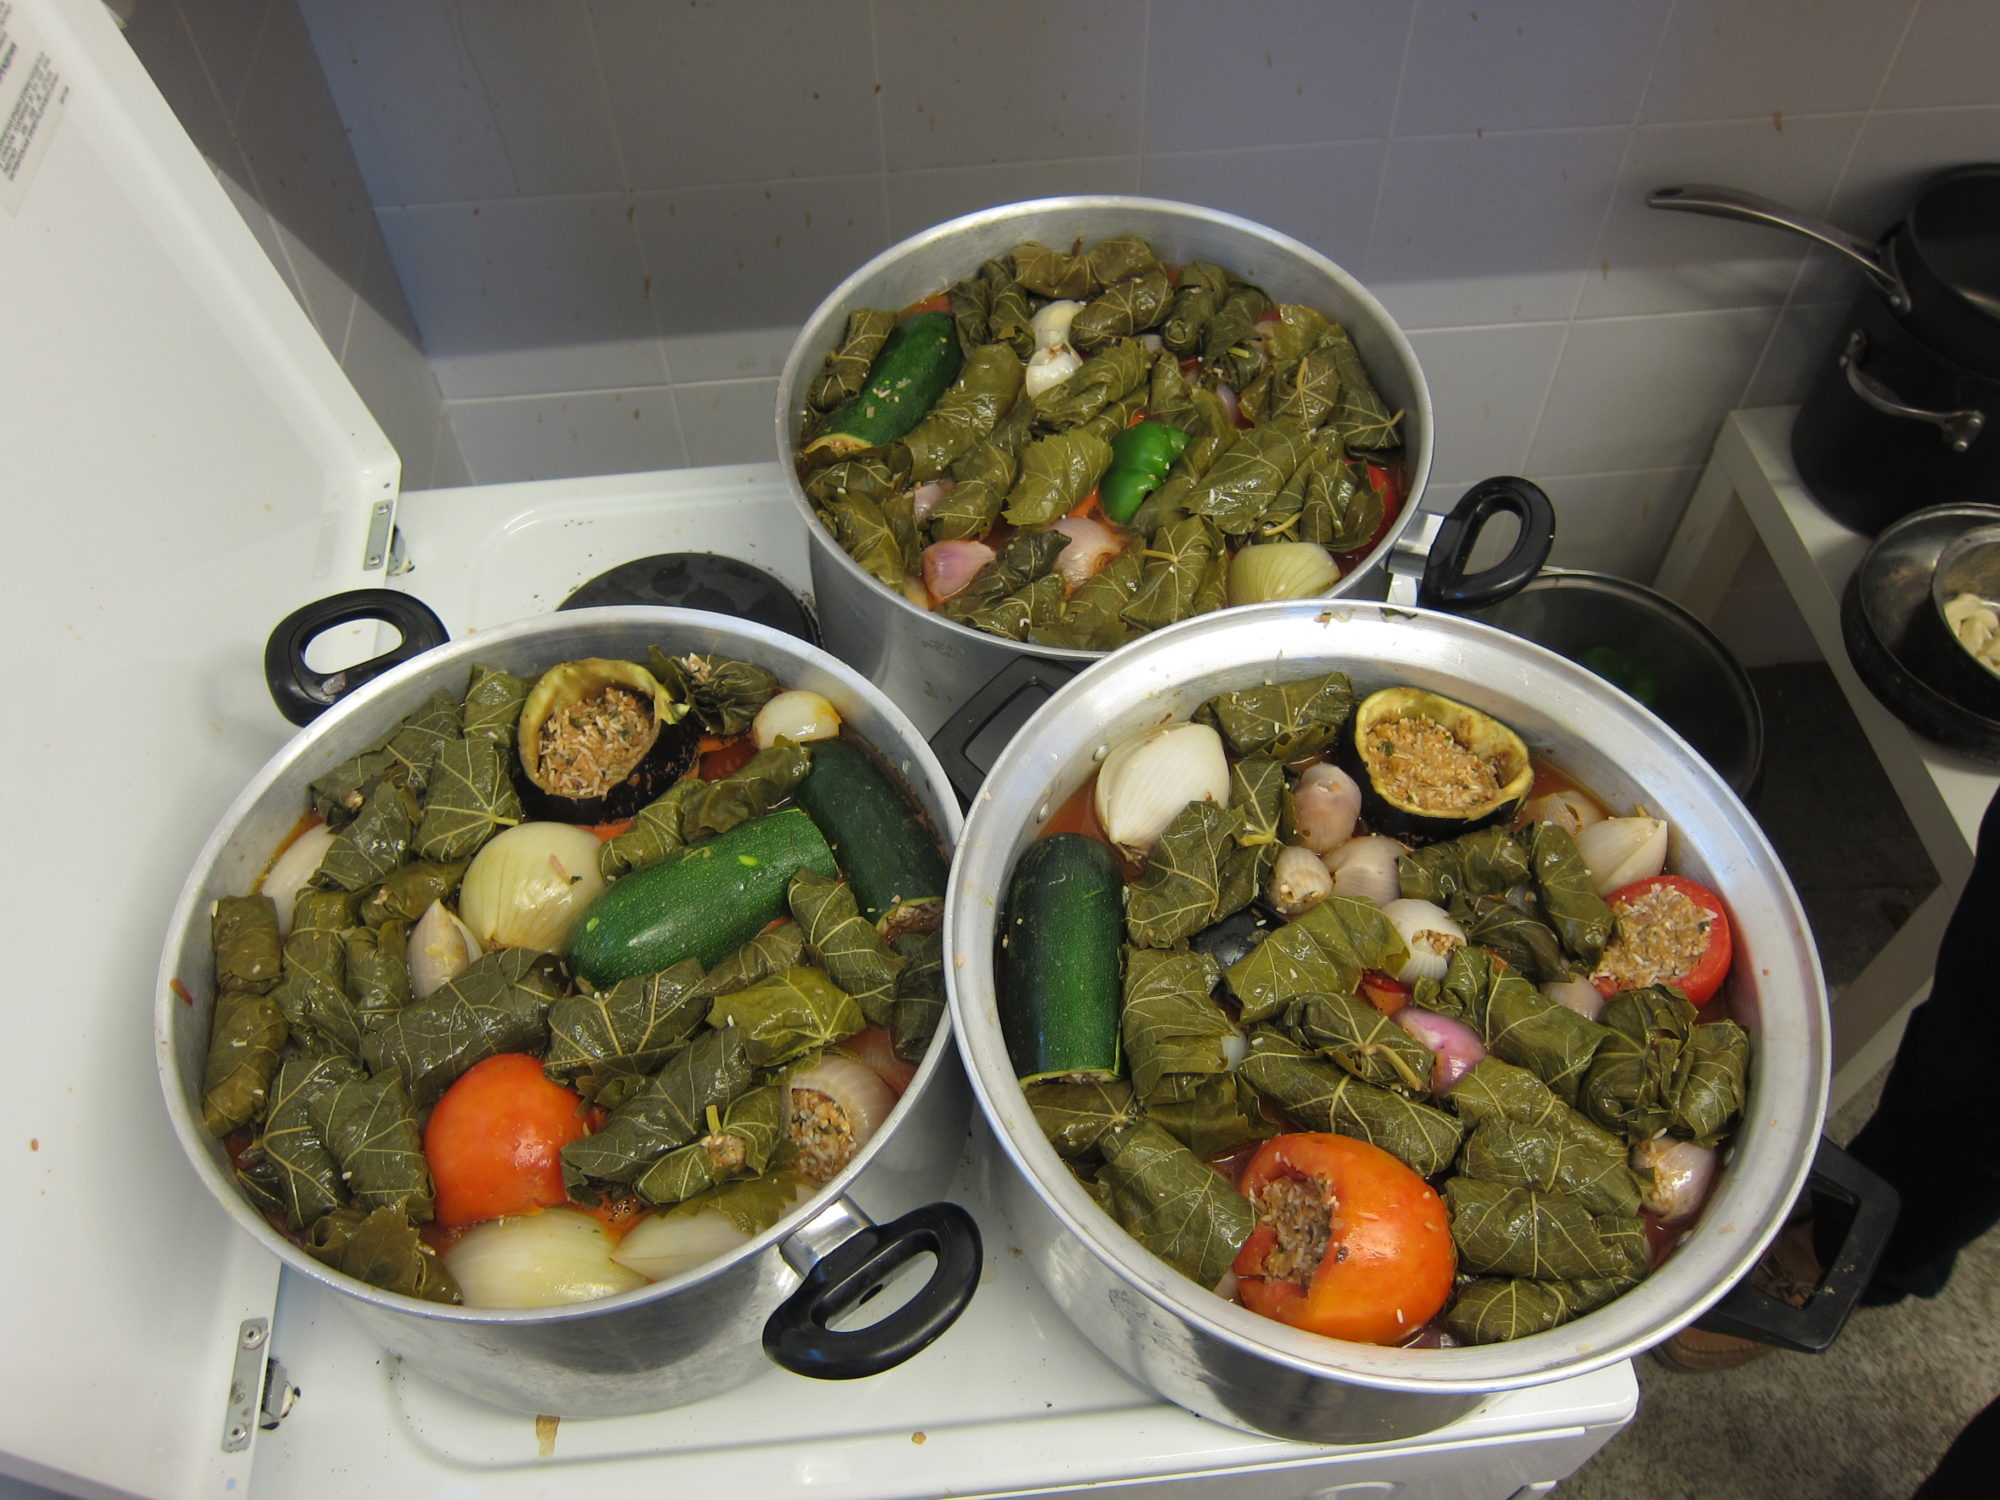 An image of three giant pots sitting on a stove, filled with green food.